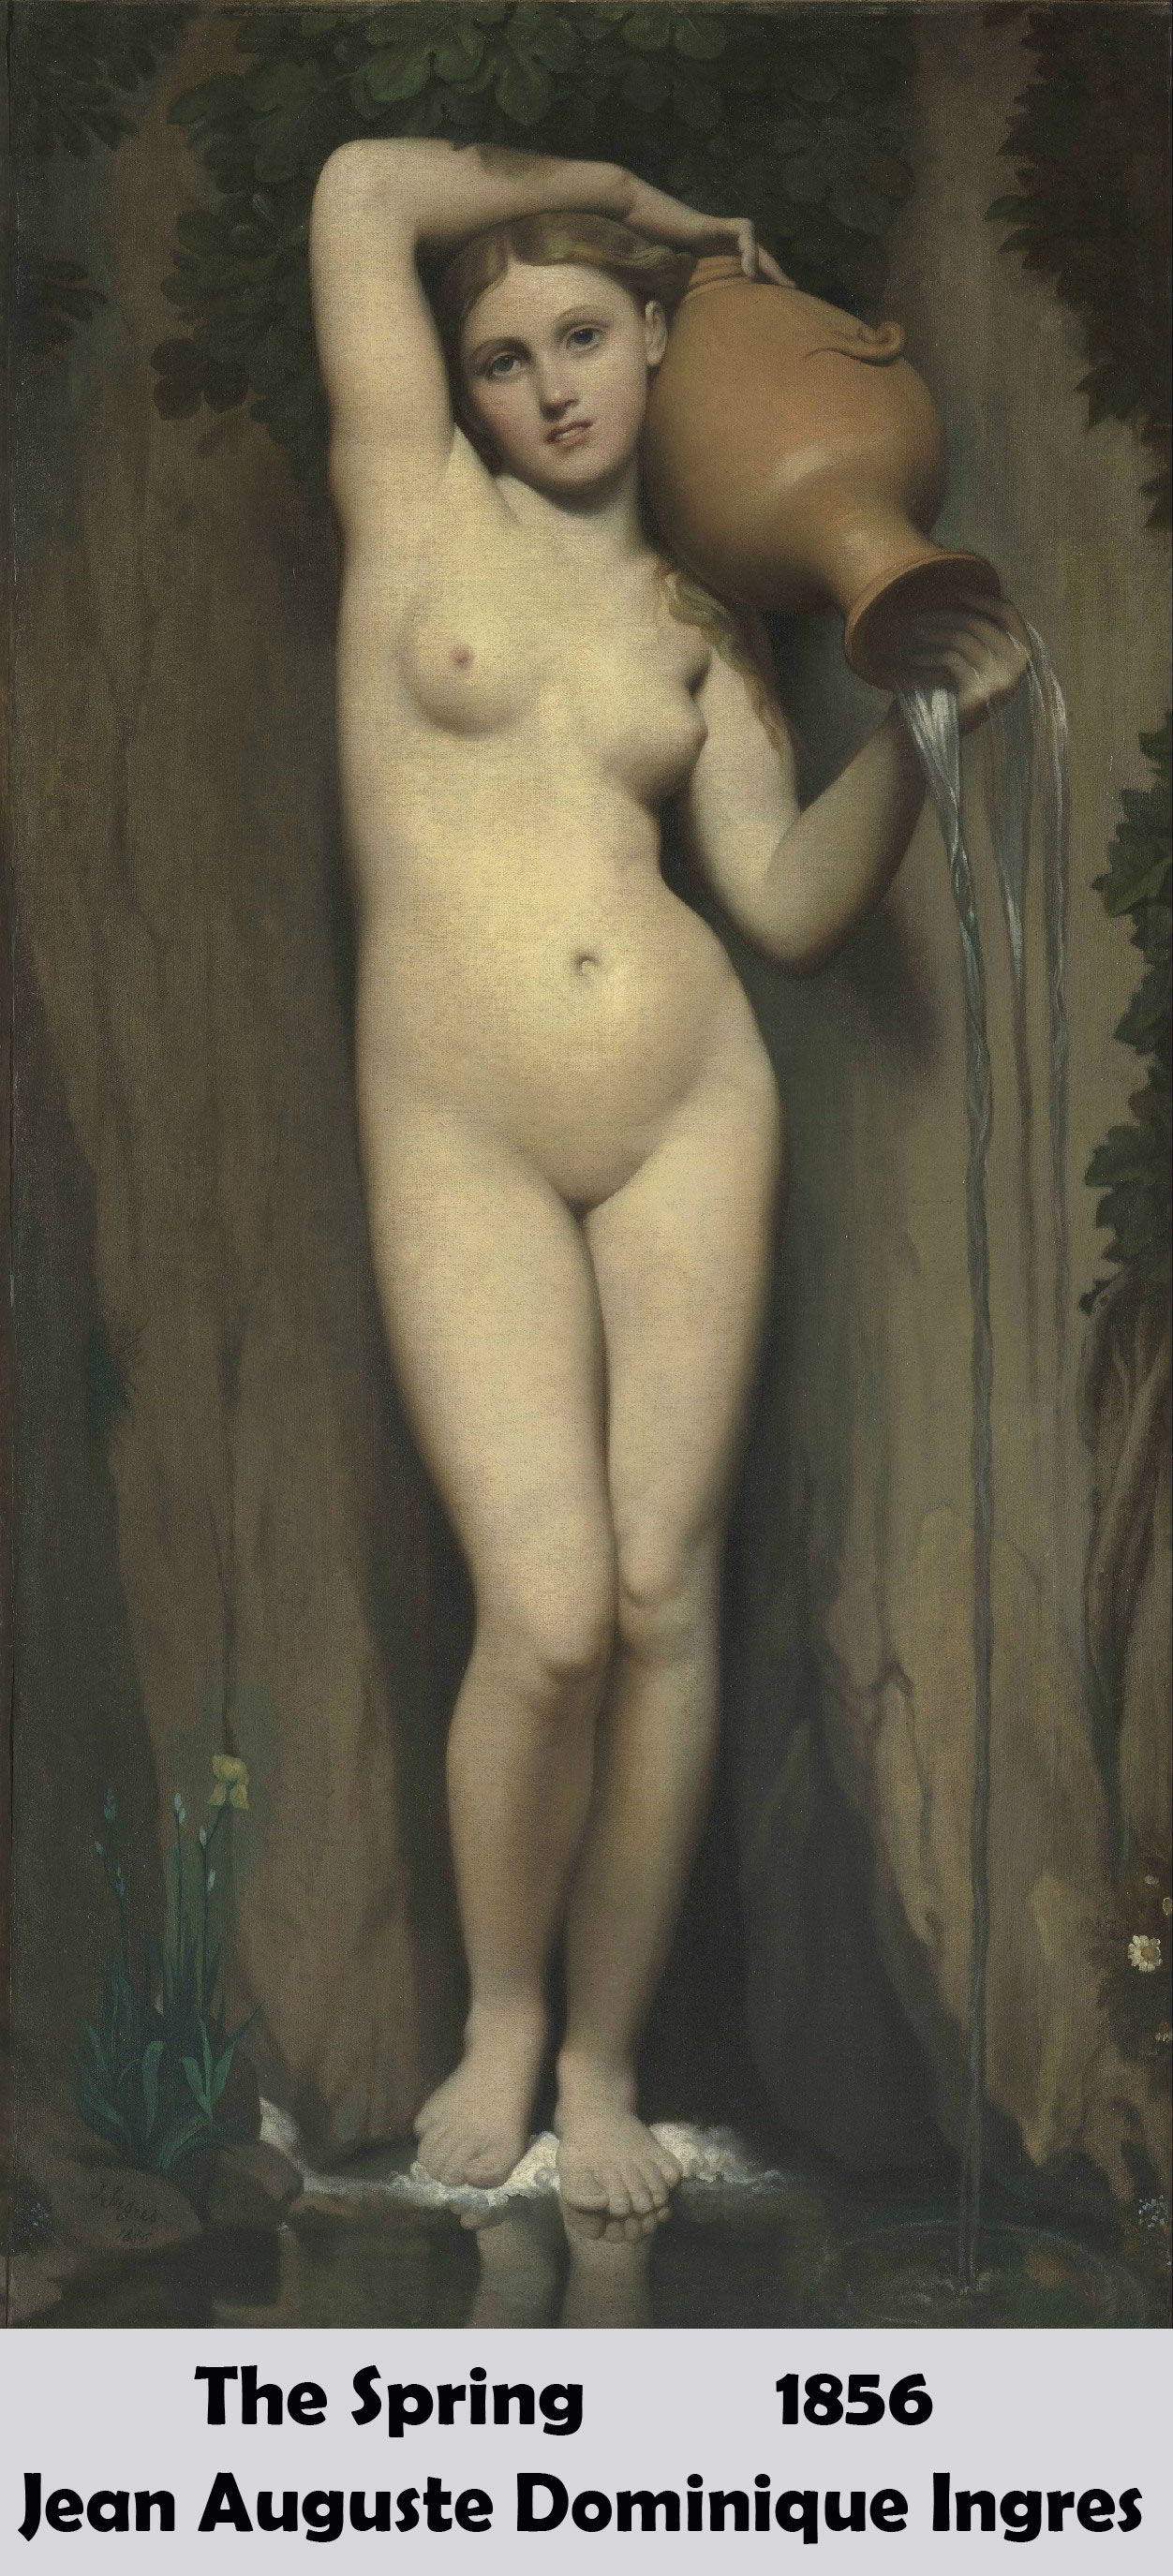 The Spring by Jean Auguste Dominique Ingres